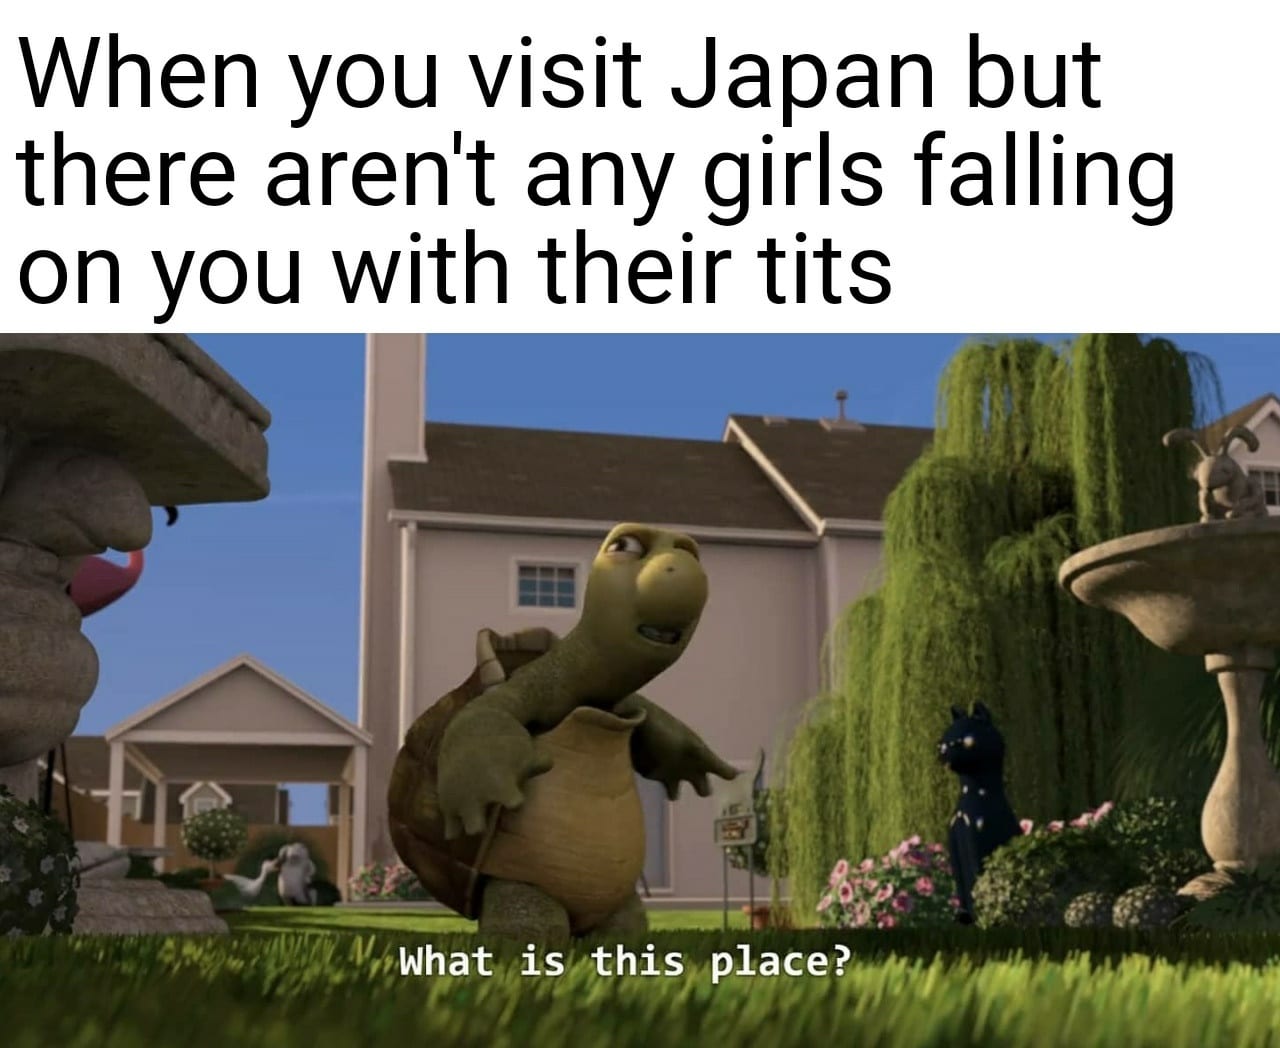 Dank, Japan, Japanese, Tokyo, The Break Up, China Dank Memes Dank, Japan, Japanese, Tokyo, The Break Up, China text: When you visit Japan but there aren't any girls falling on you with their tits 'What Gis€this place? 